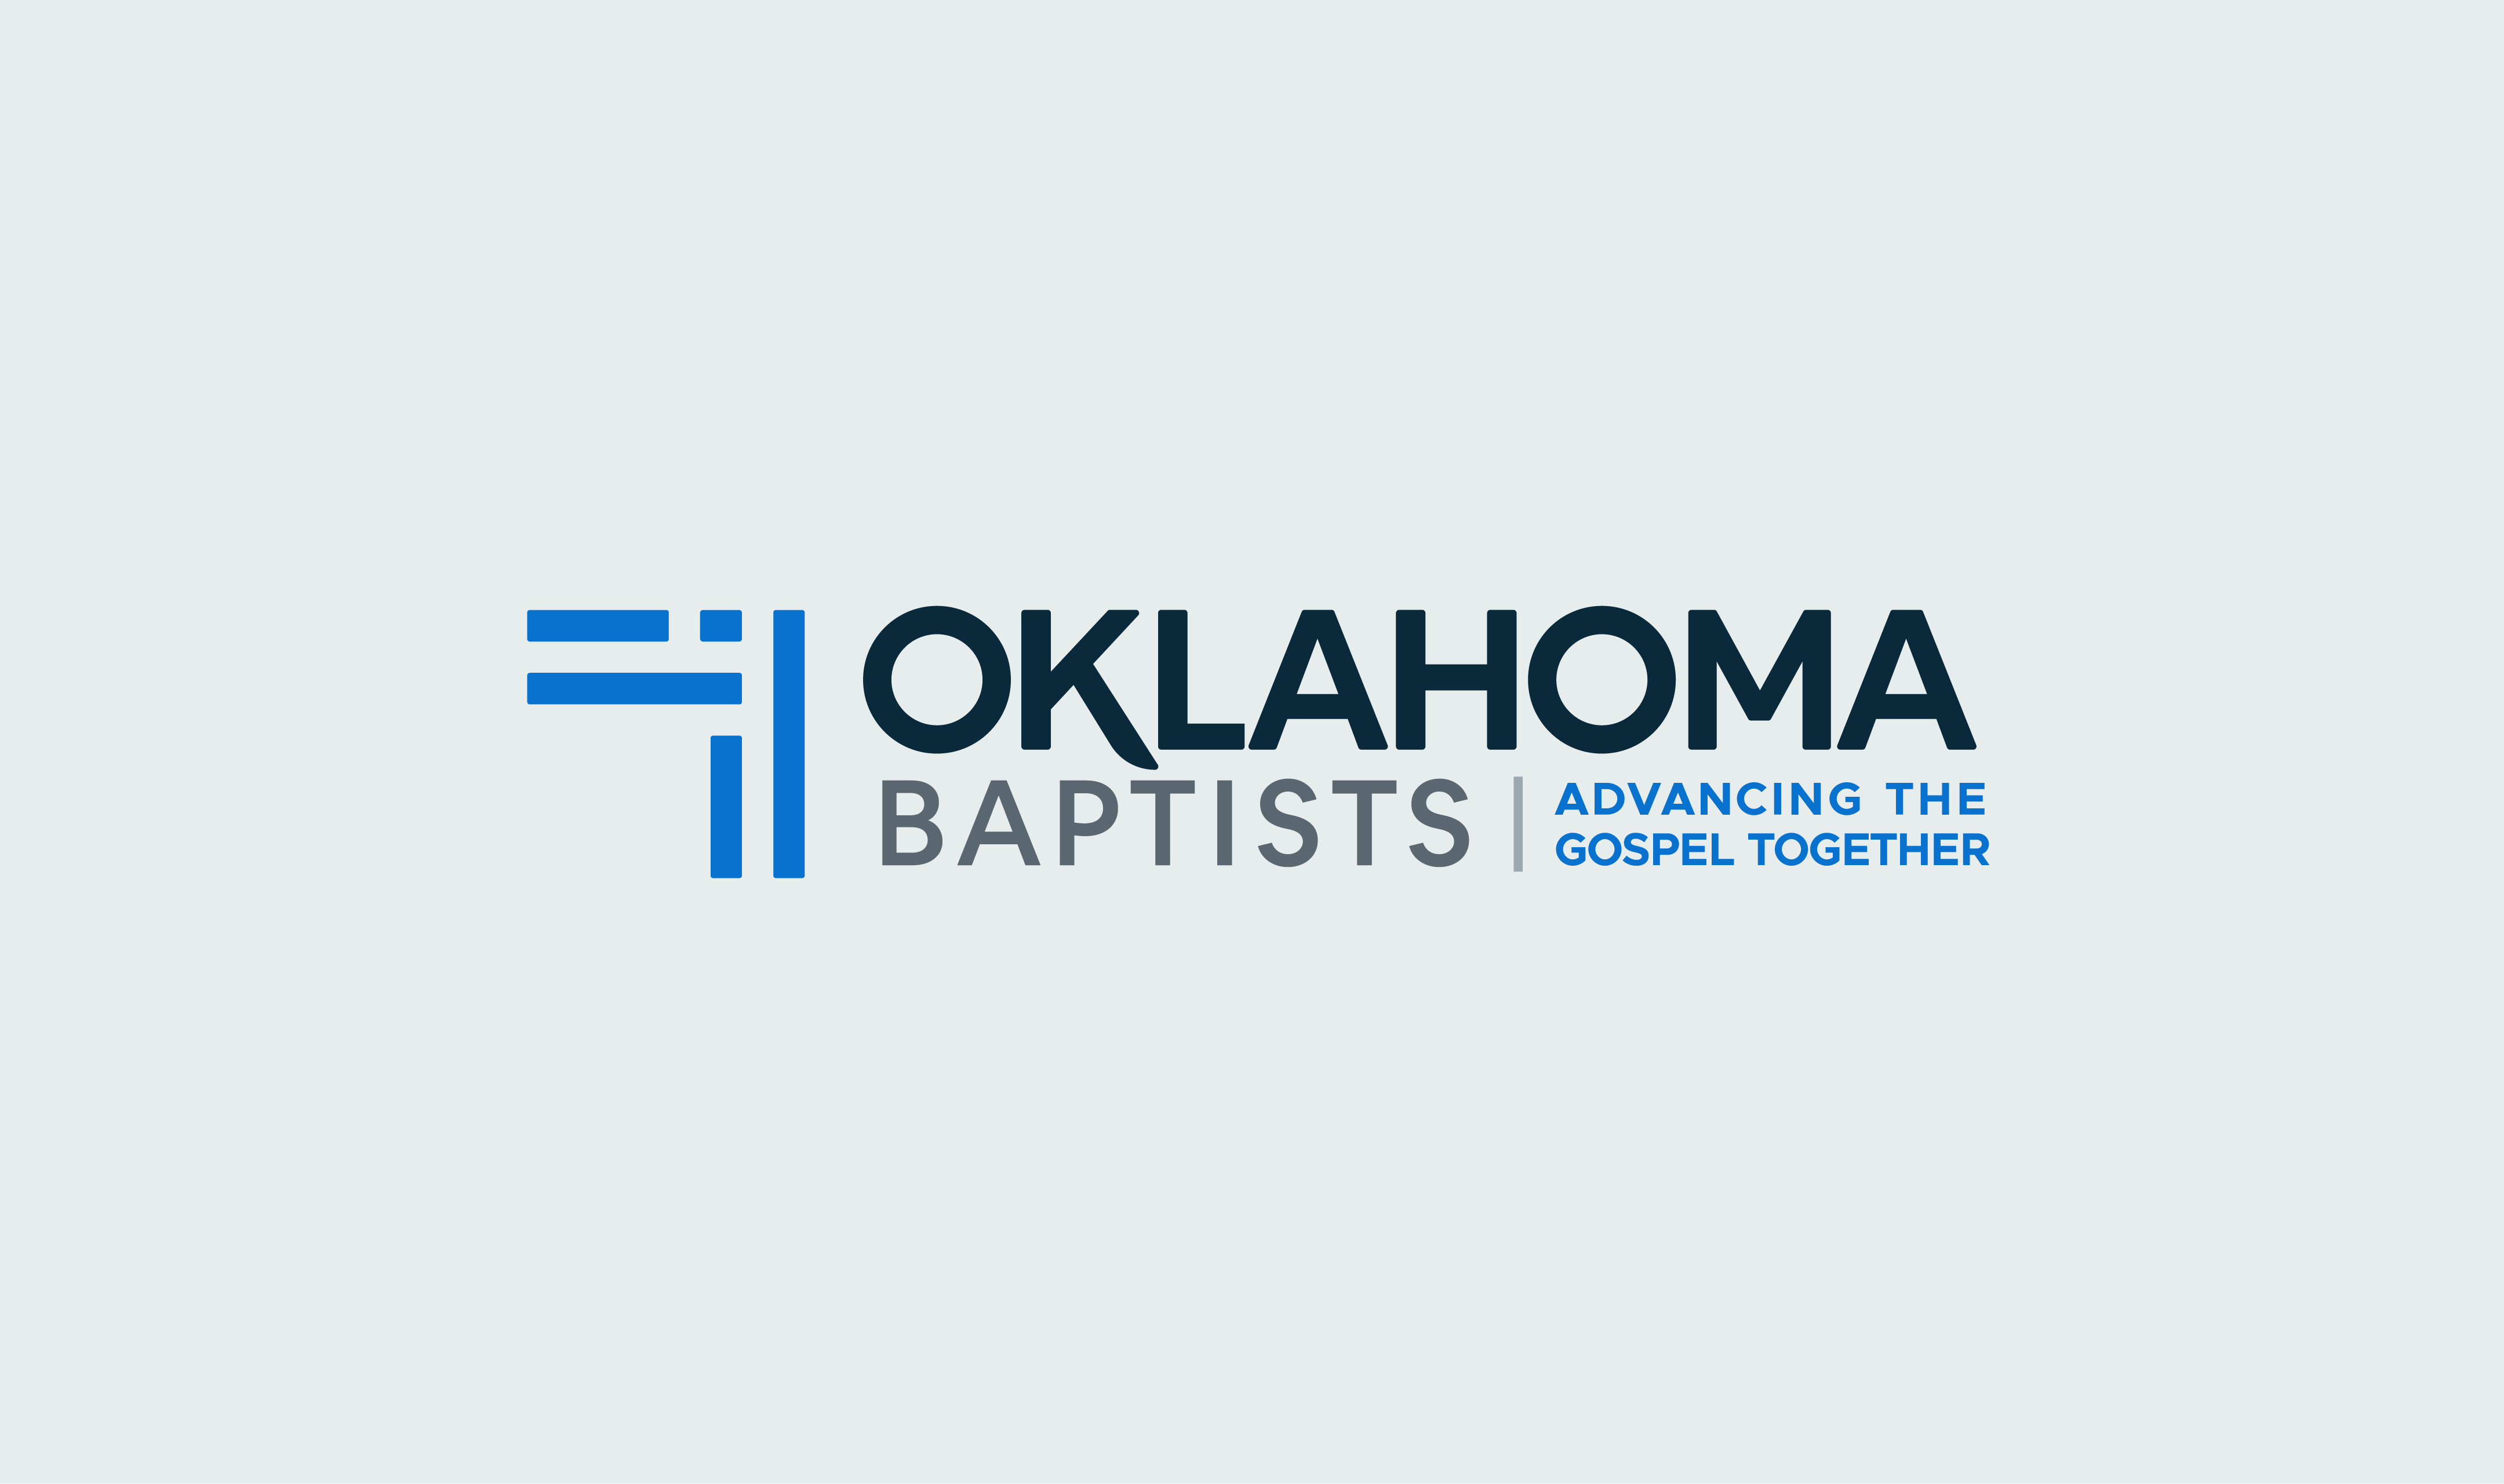 A version of the Oklahoma Baptists logo with the tagline 'Advancing the Gospel together'